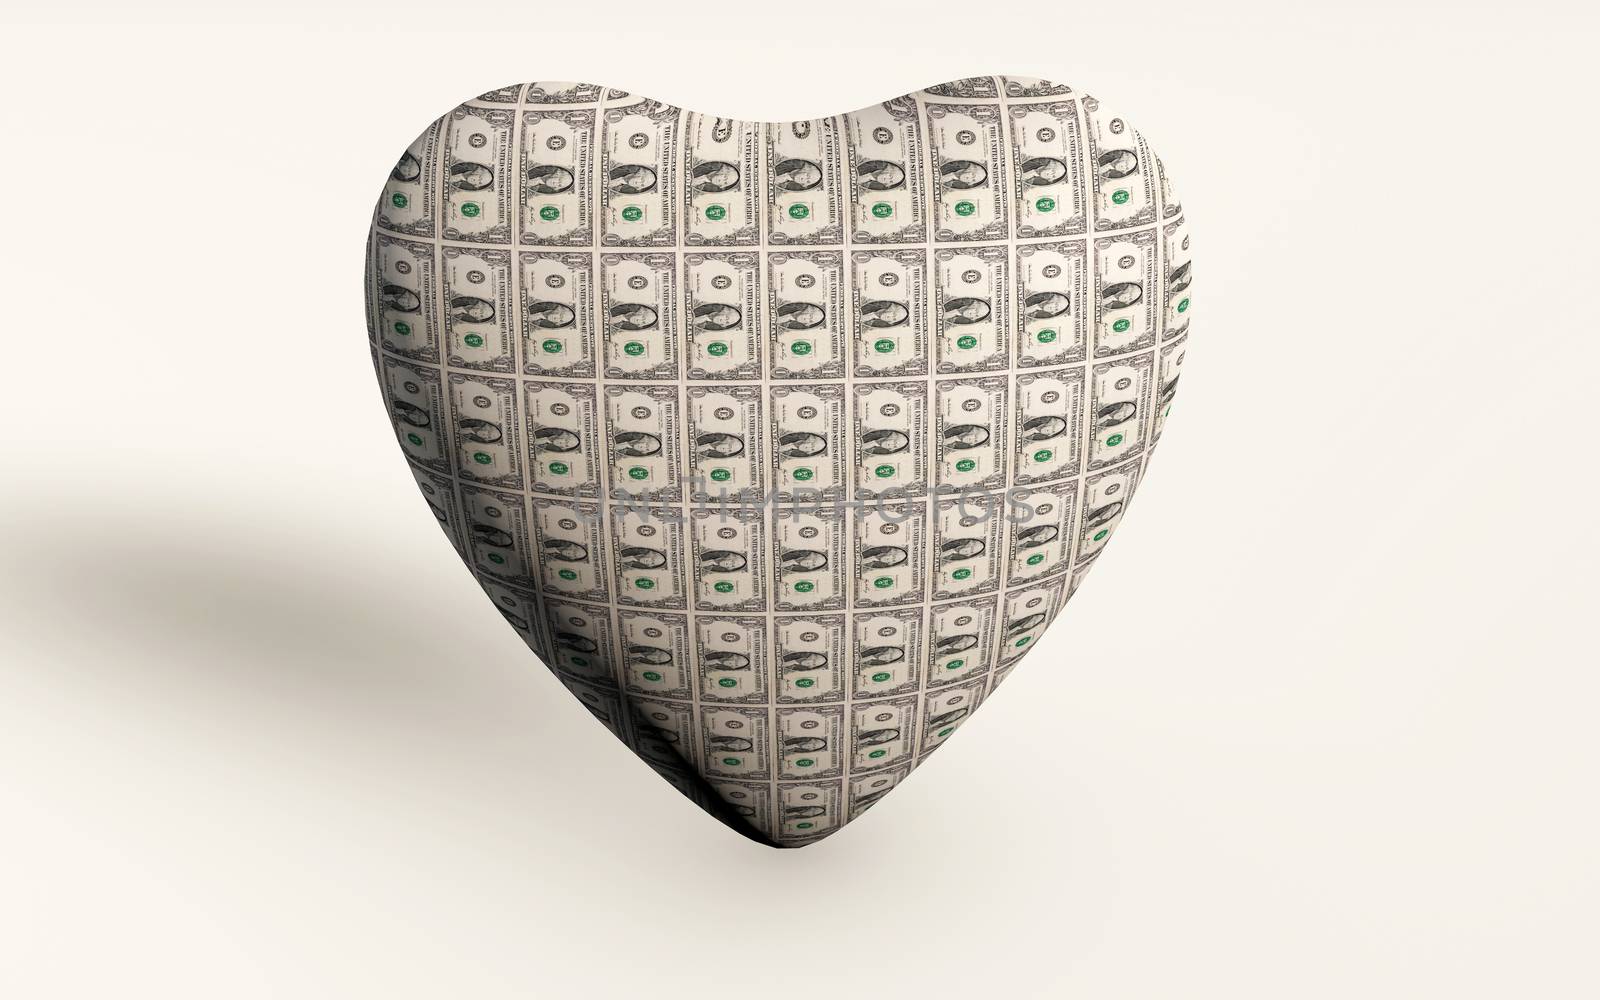 3d rendering of a heart made from us dollars money by F1b0nacci